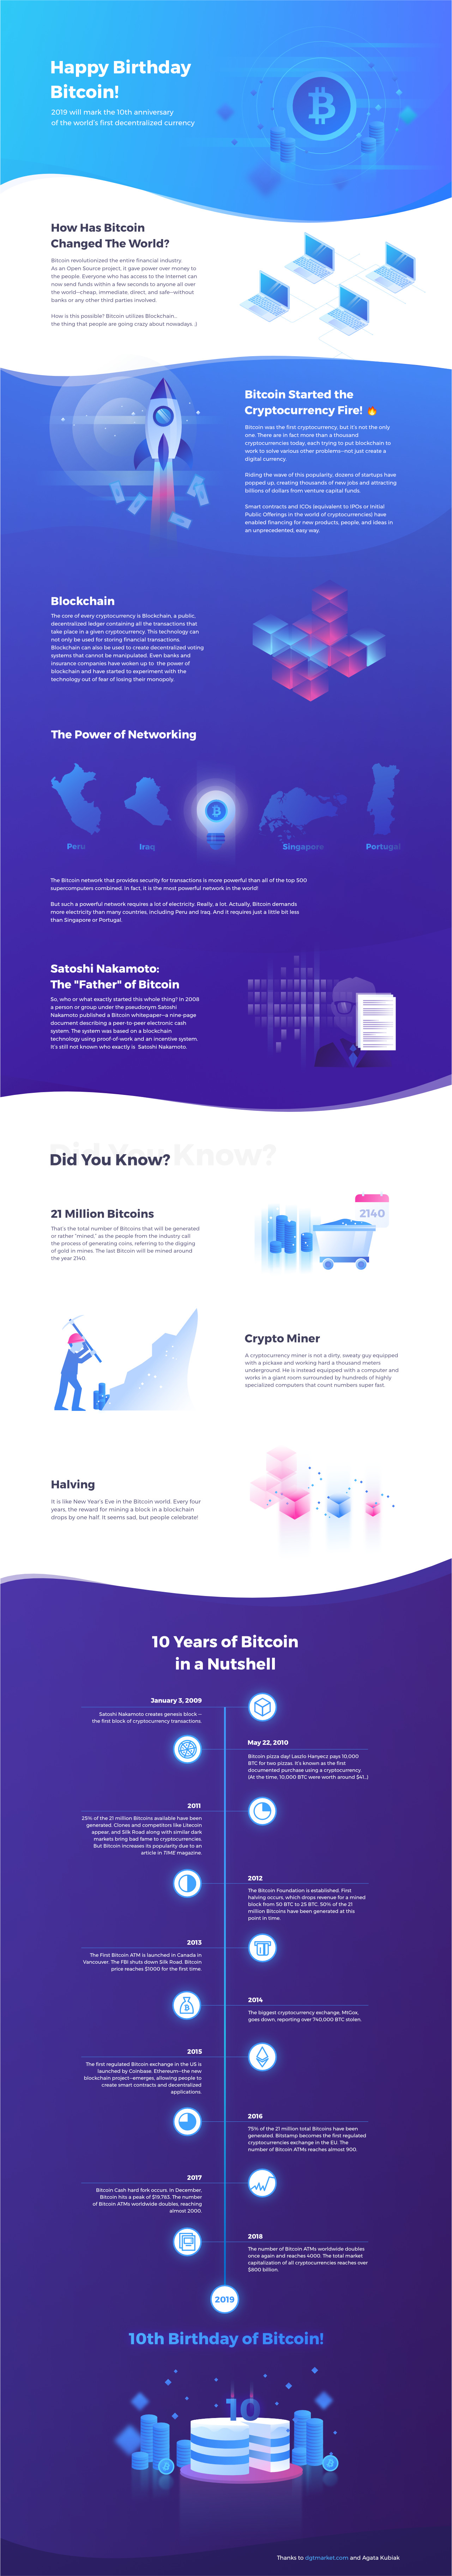 10th Anniverary of Bitcoin infographics